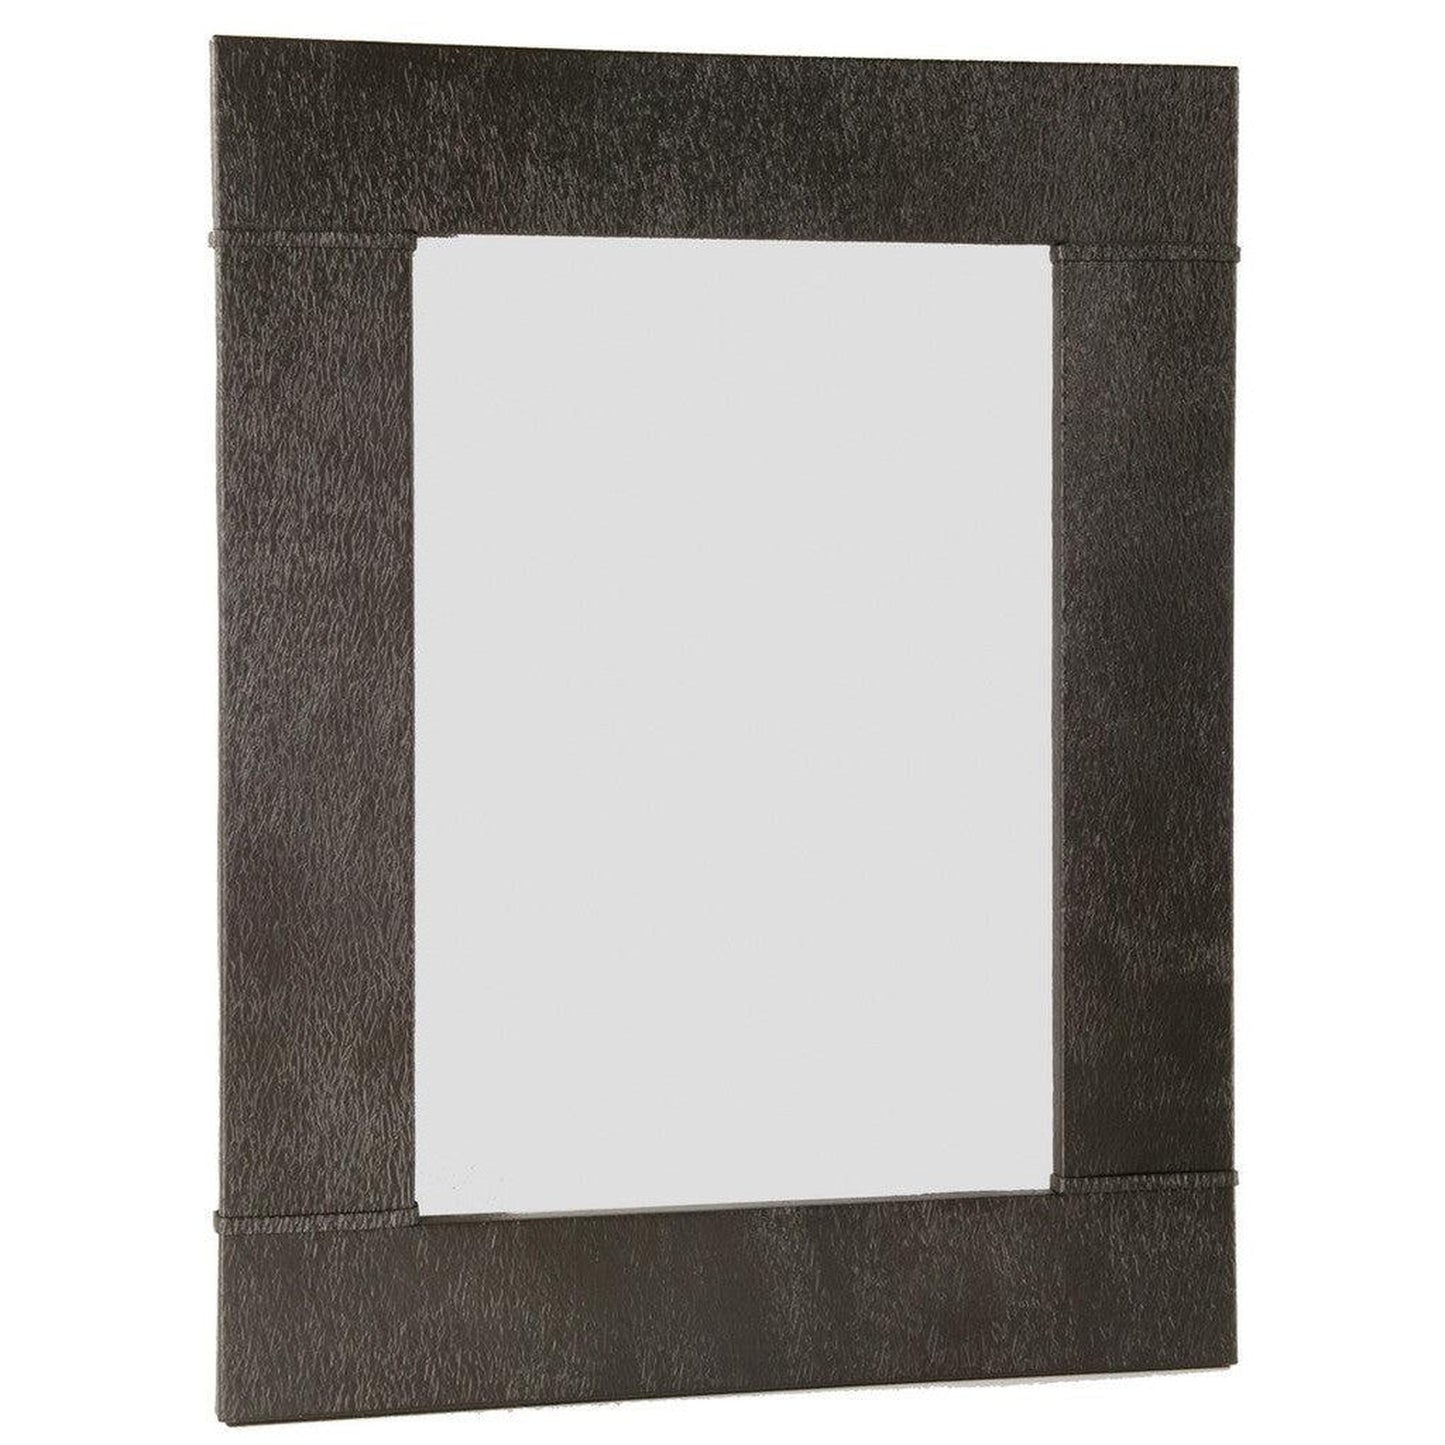 Stone County Ironworks Cedarvale 37" x 45" Large Hand Rubbed Pewter Iron Wall Mirror With Copper Iron Accent